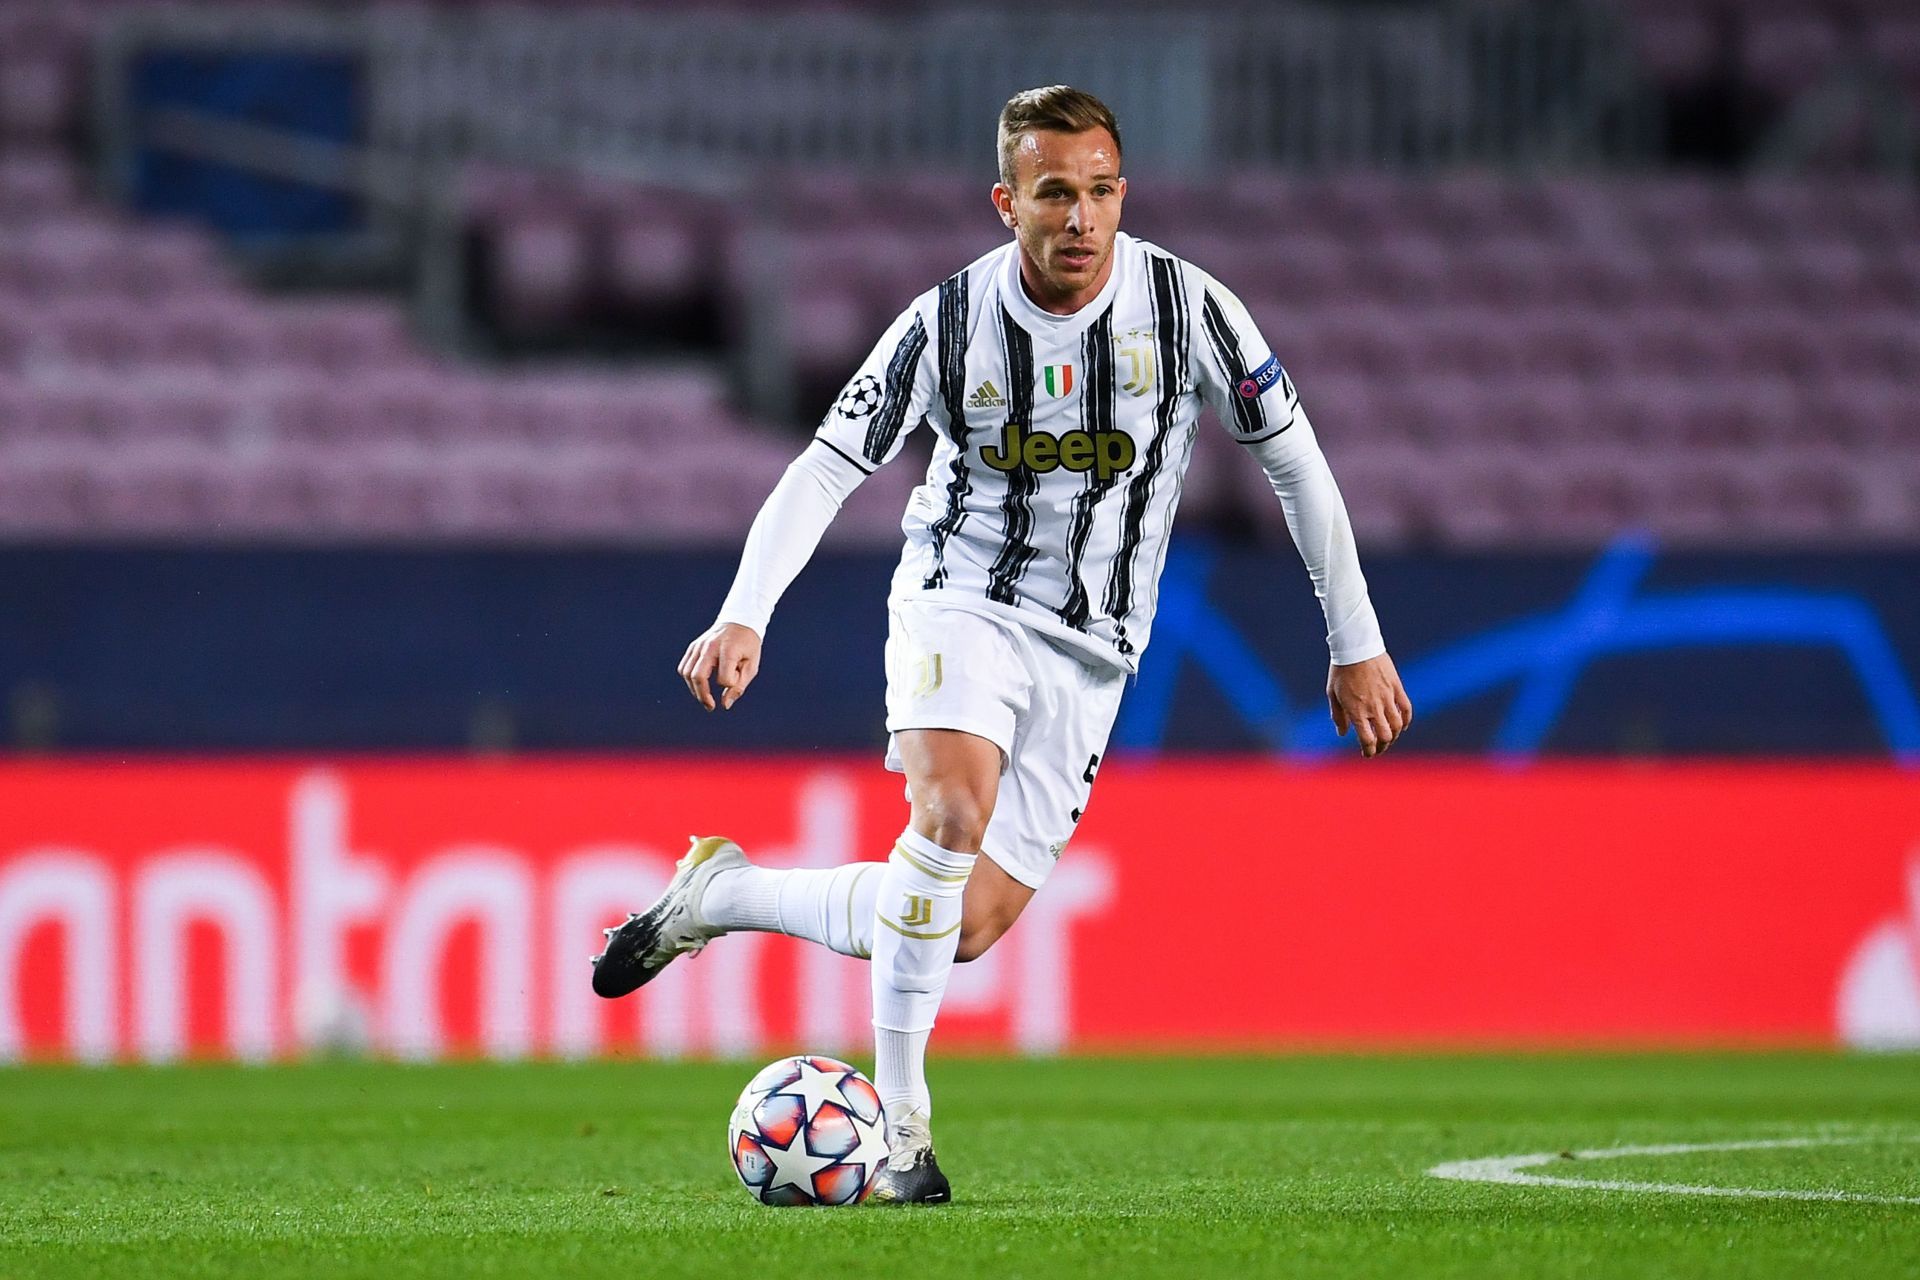 Arthur has struggled with various injury issues throughout his Juventus career